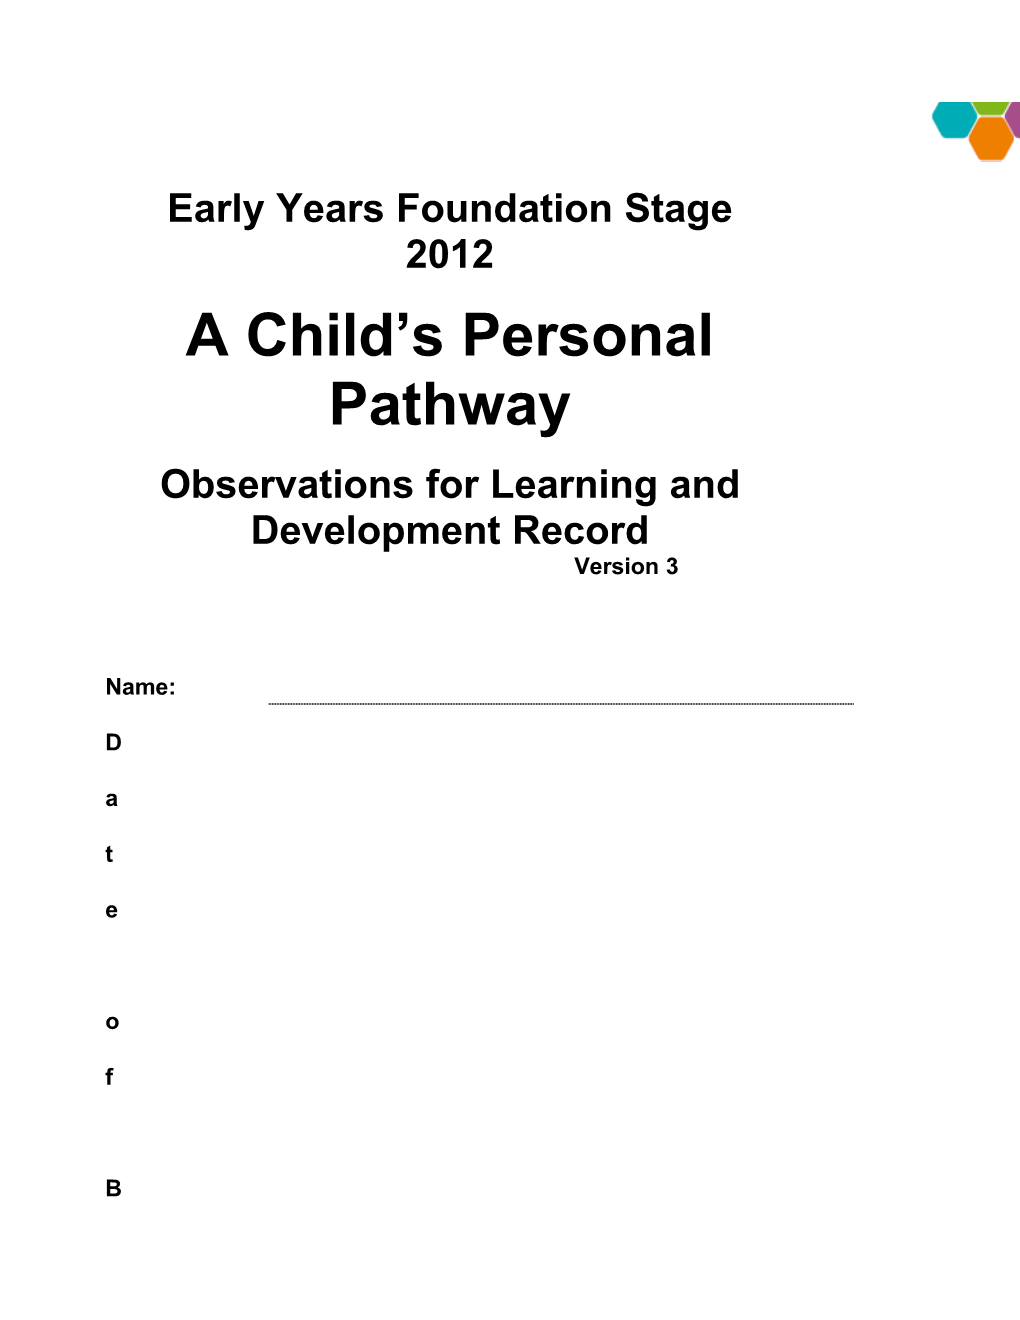 A Child's Personal Pathway - Version 3